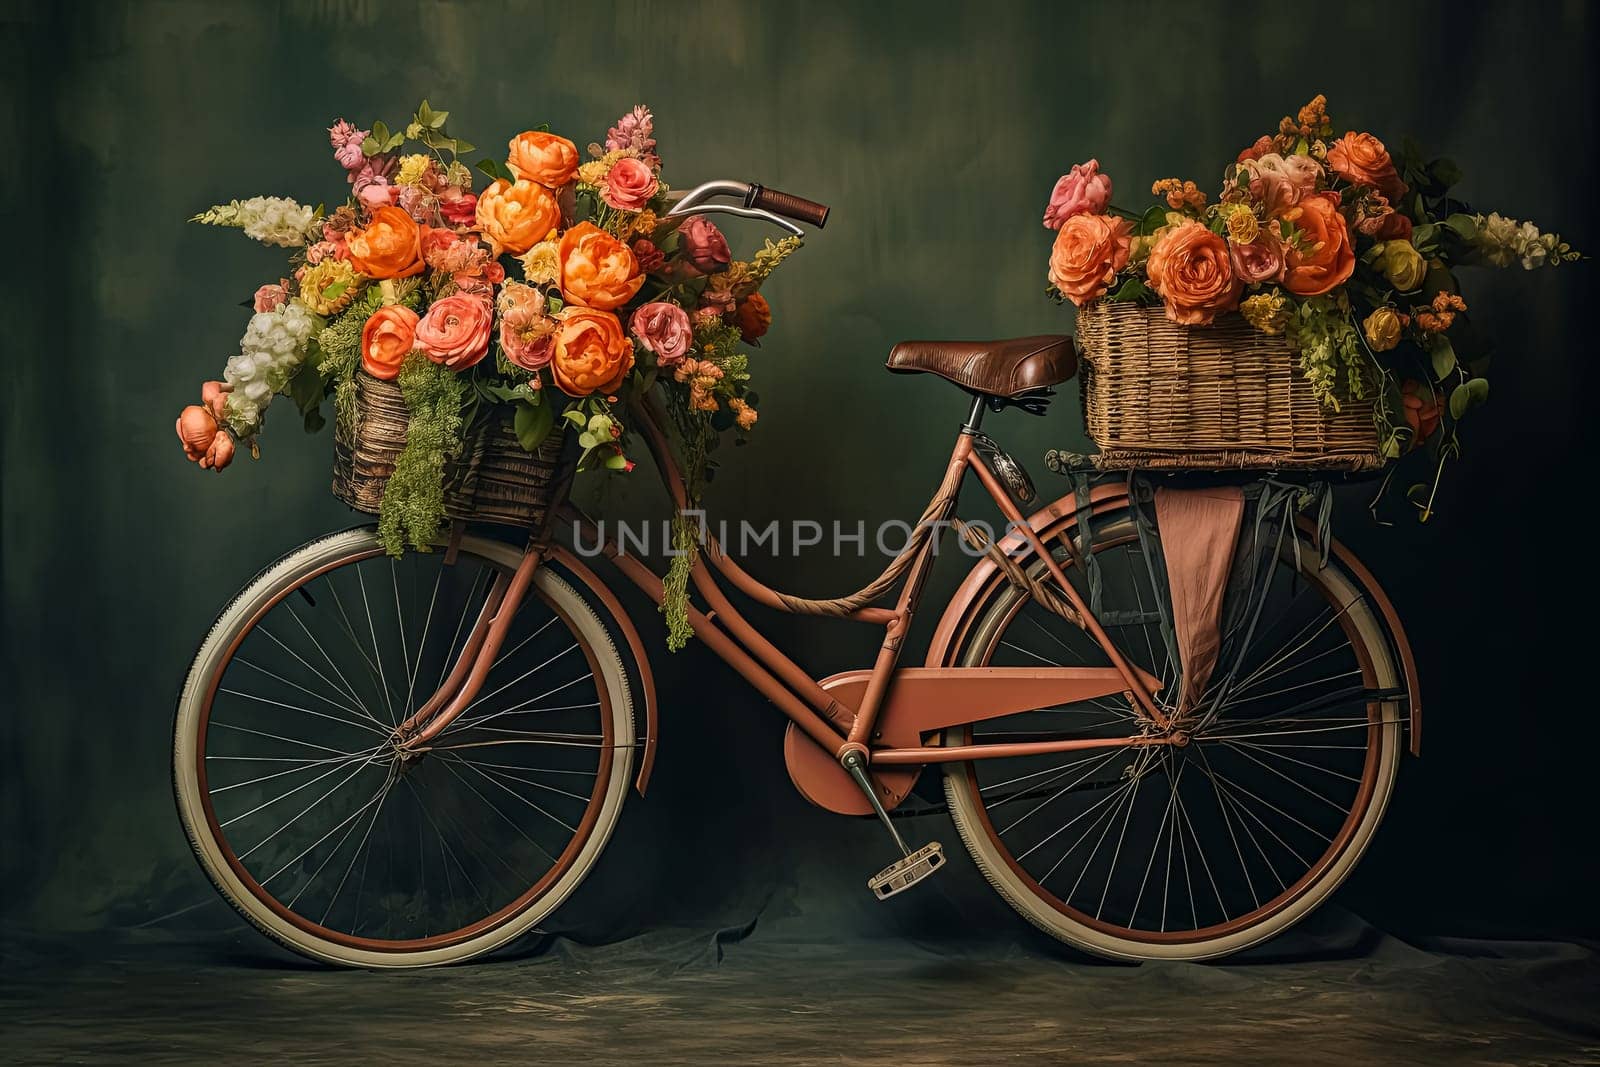 A bicycle with a basket full of flowers on it. The bike is on a blue wall